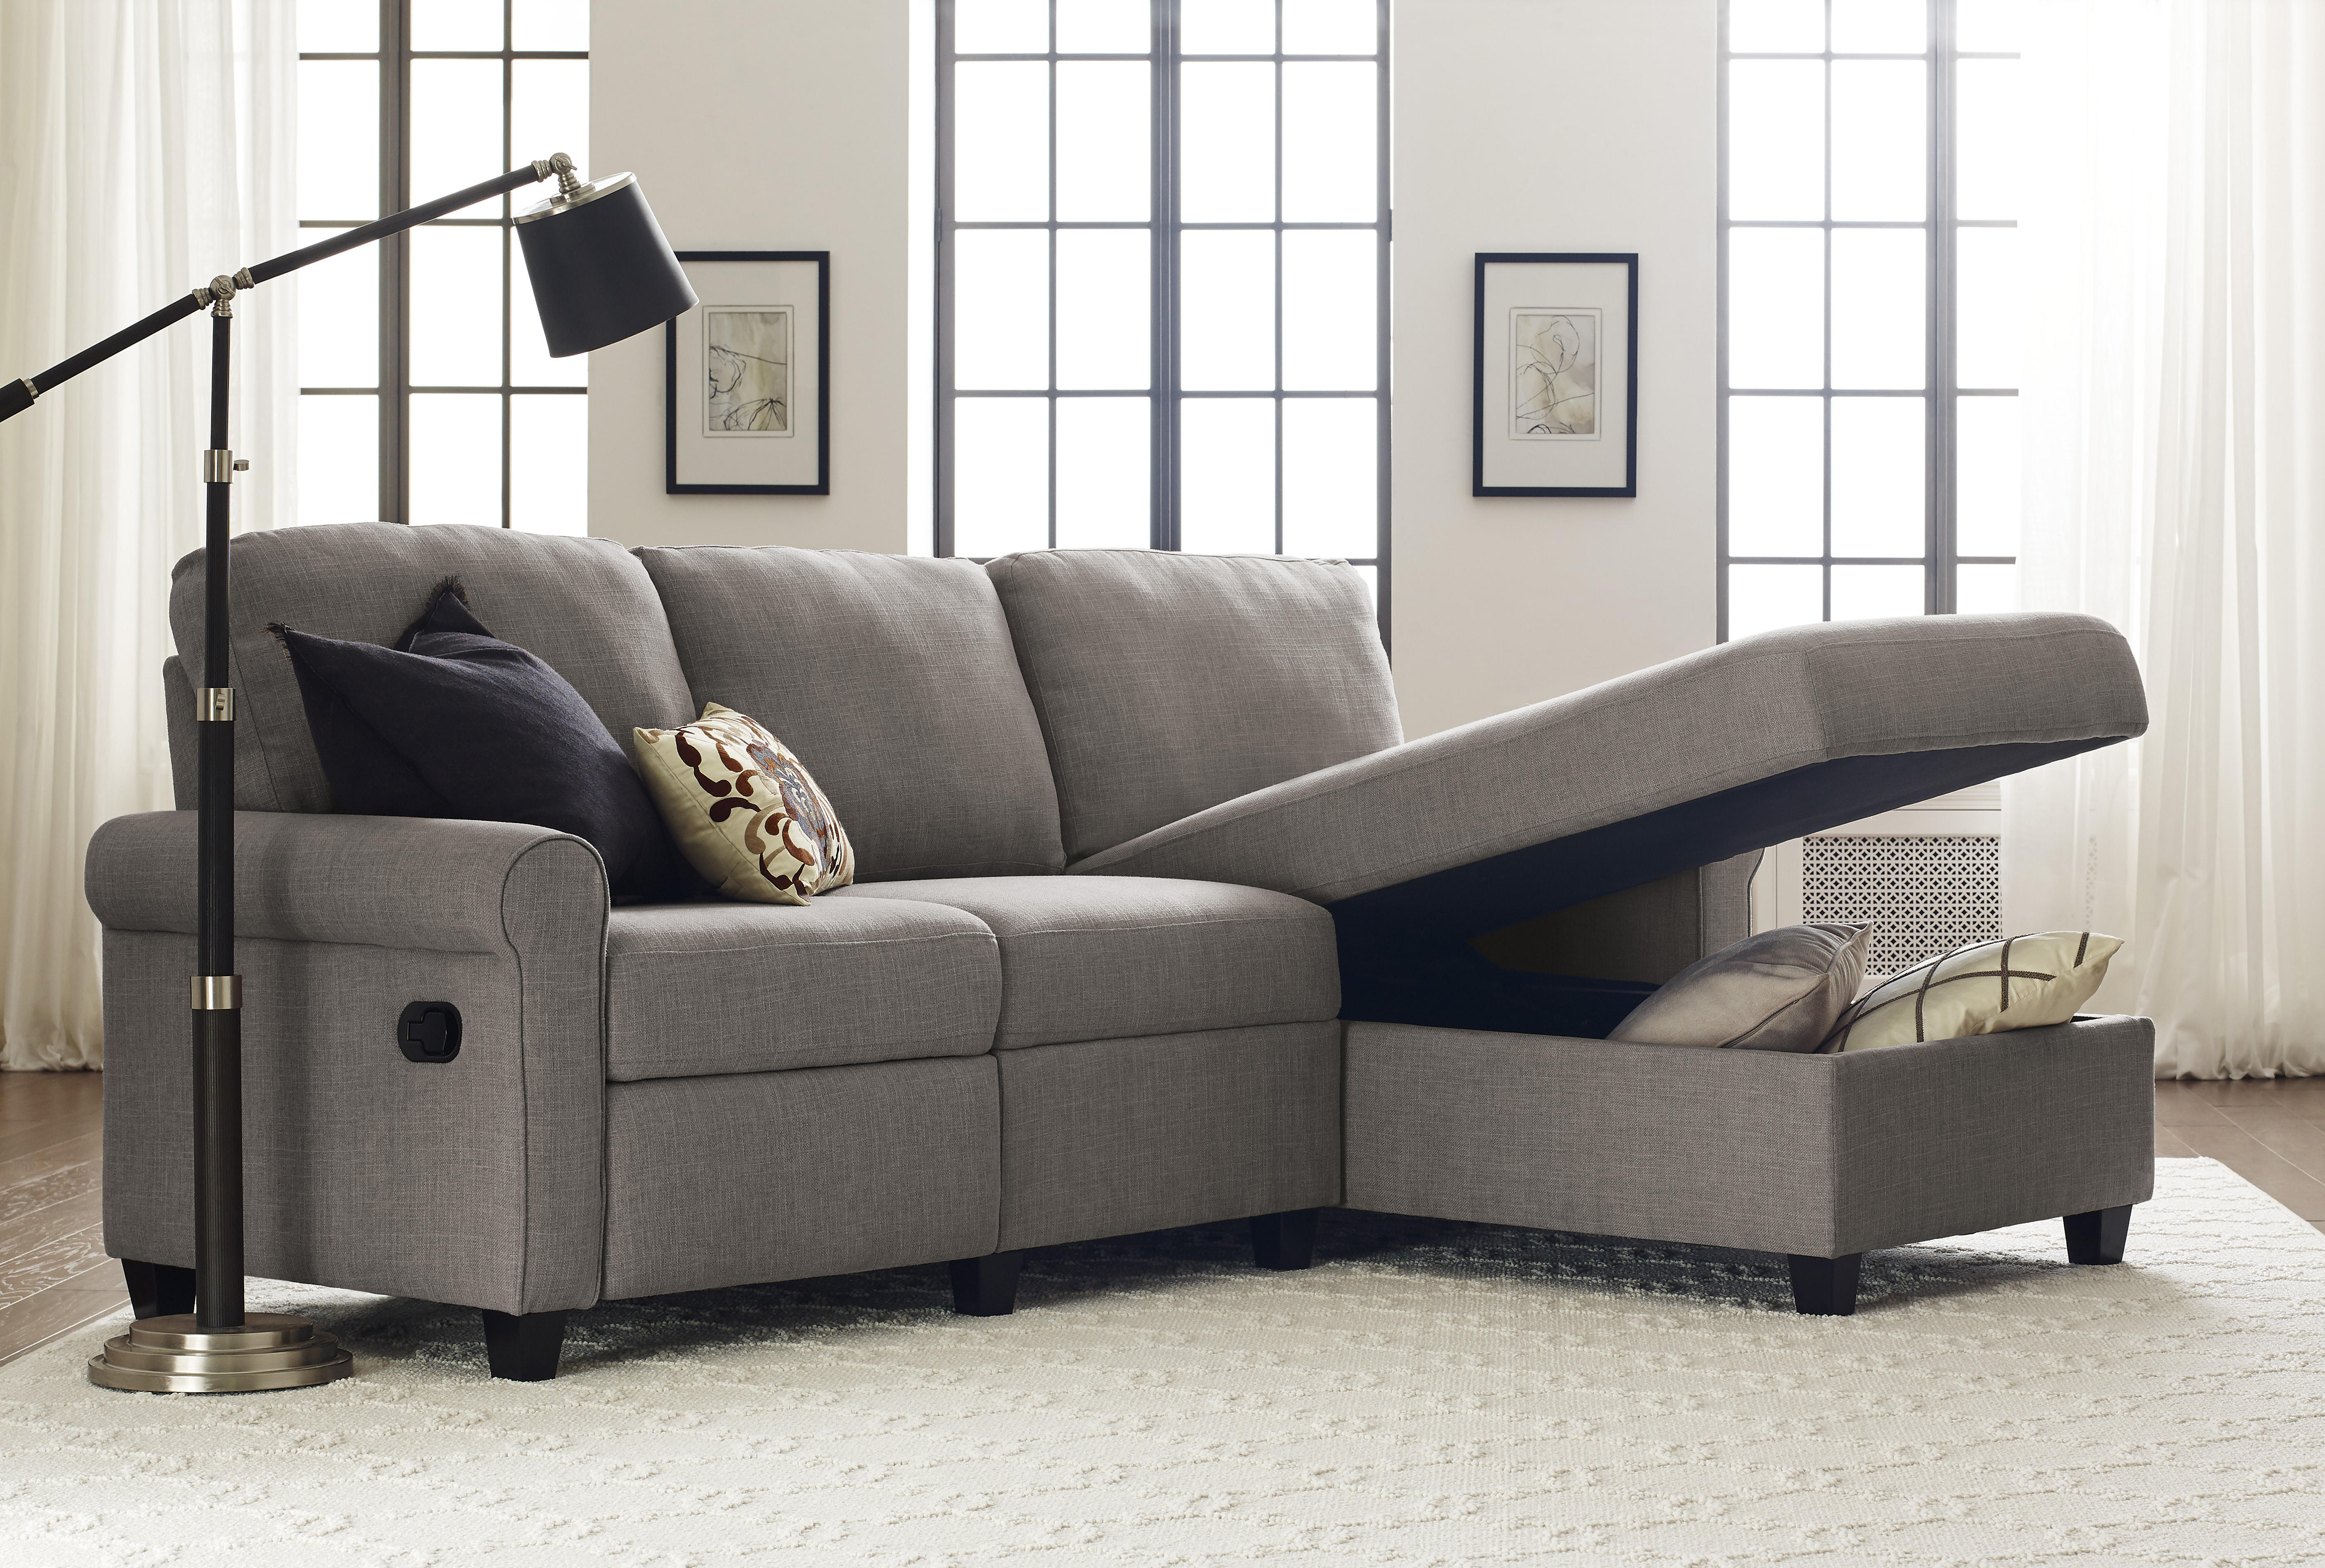 Serta Copenhagen Reclining Sectional with Right Storage Chaise - Gray - image 3 of 10